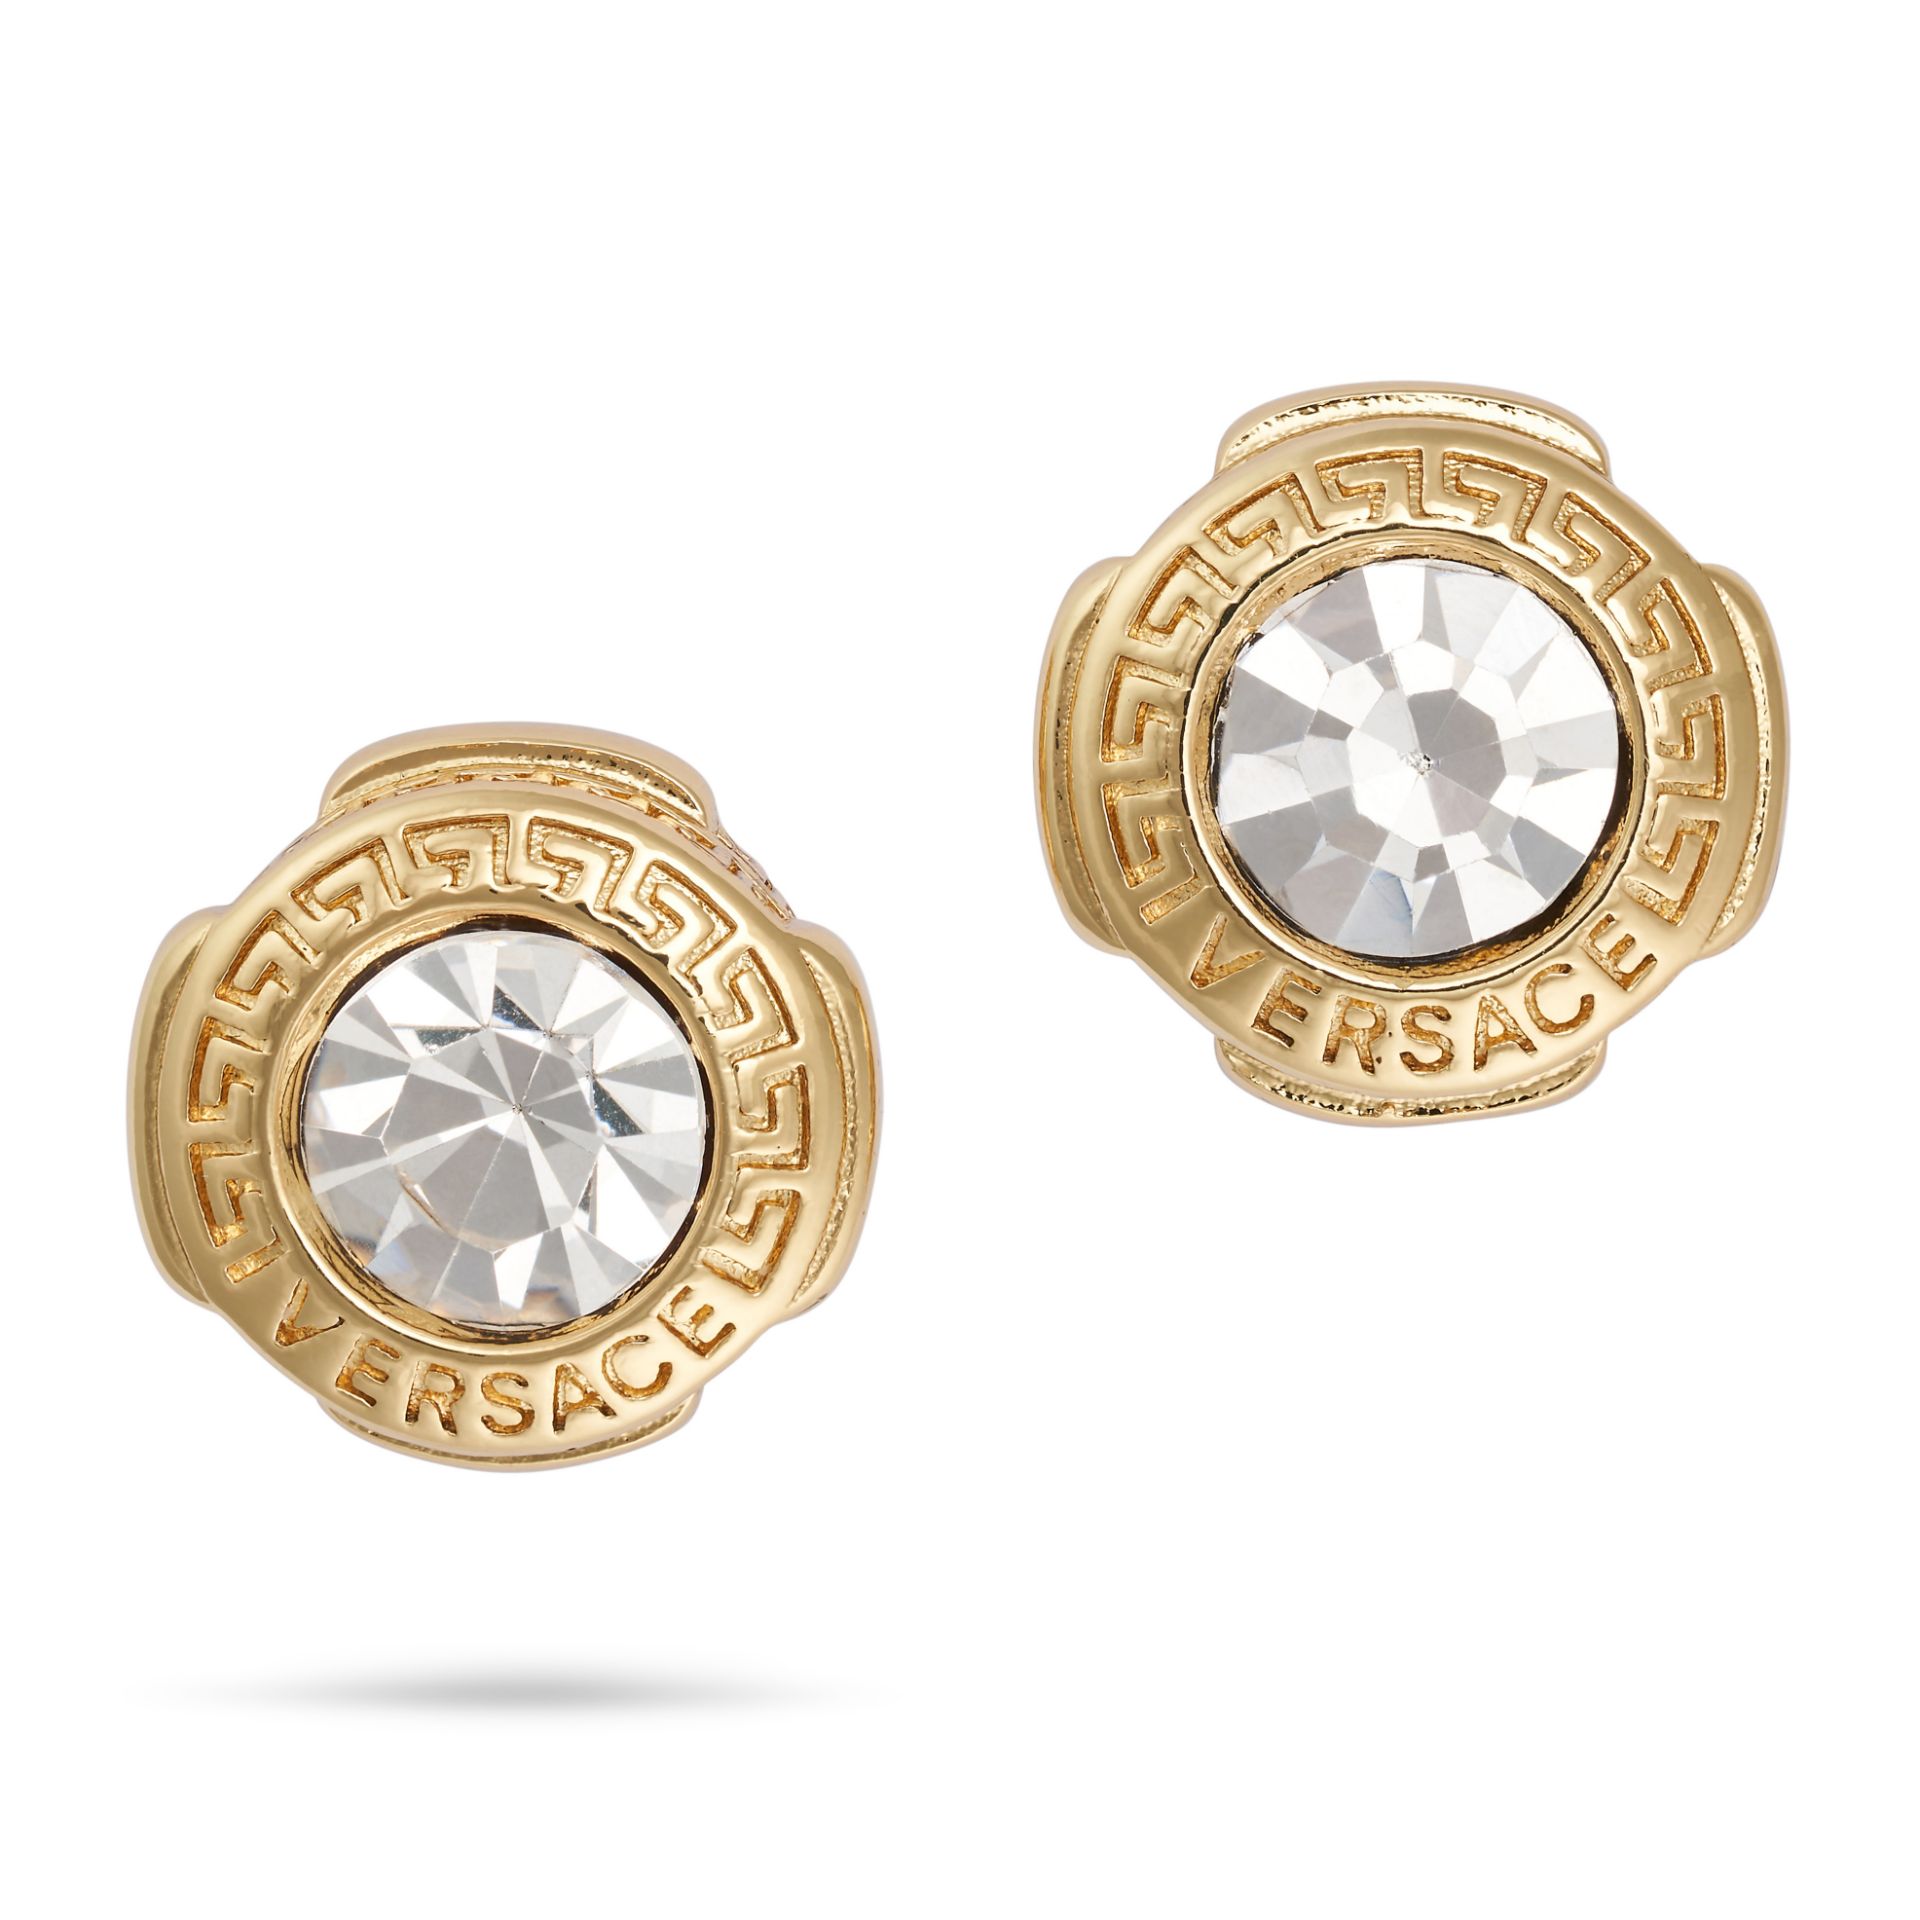 NO RESERVE - VERSACE, A PAIR OF RHINESTONE STUD EARRINGS each set with a round cut rhinestone in ...